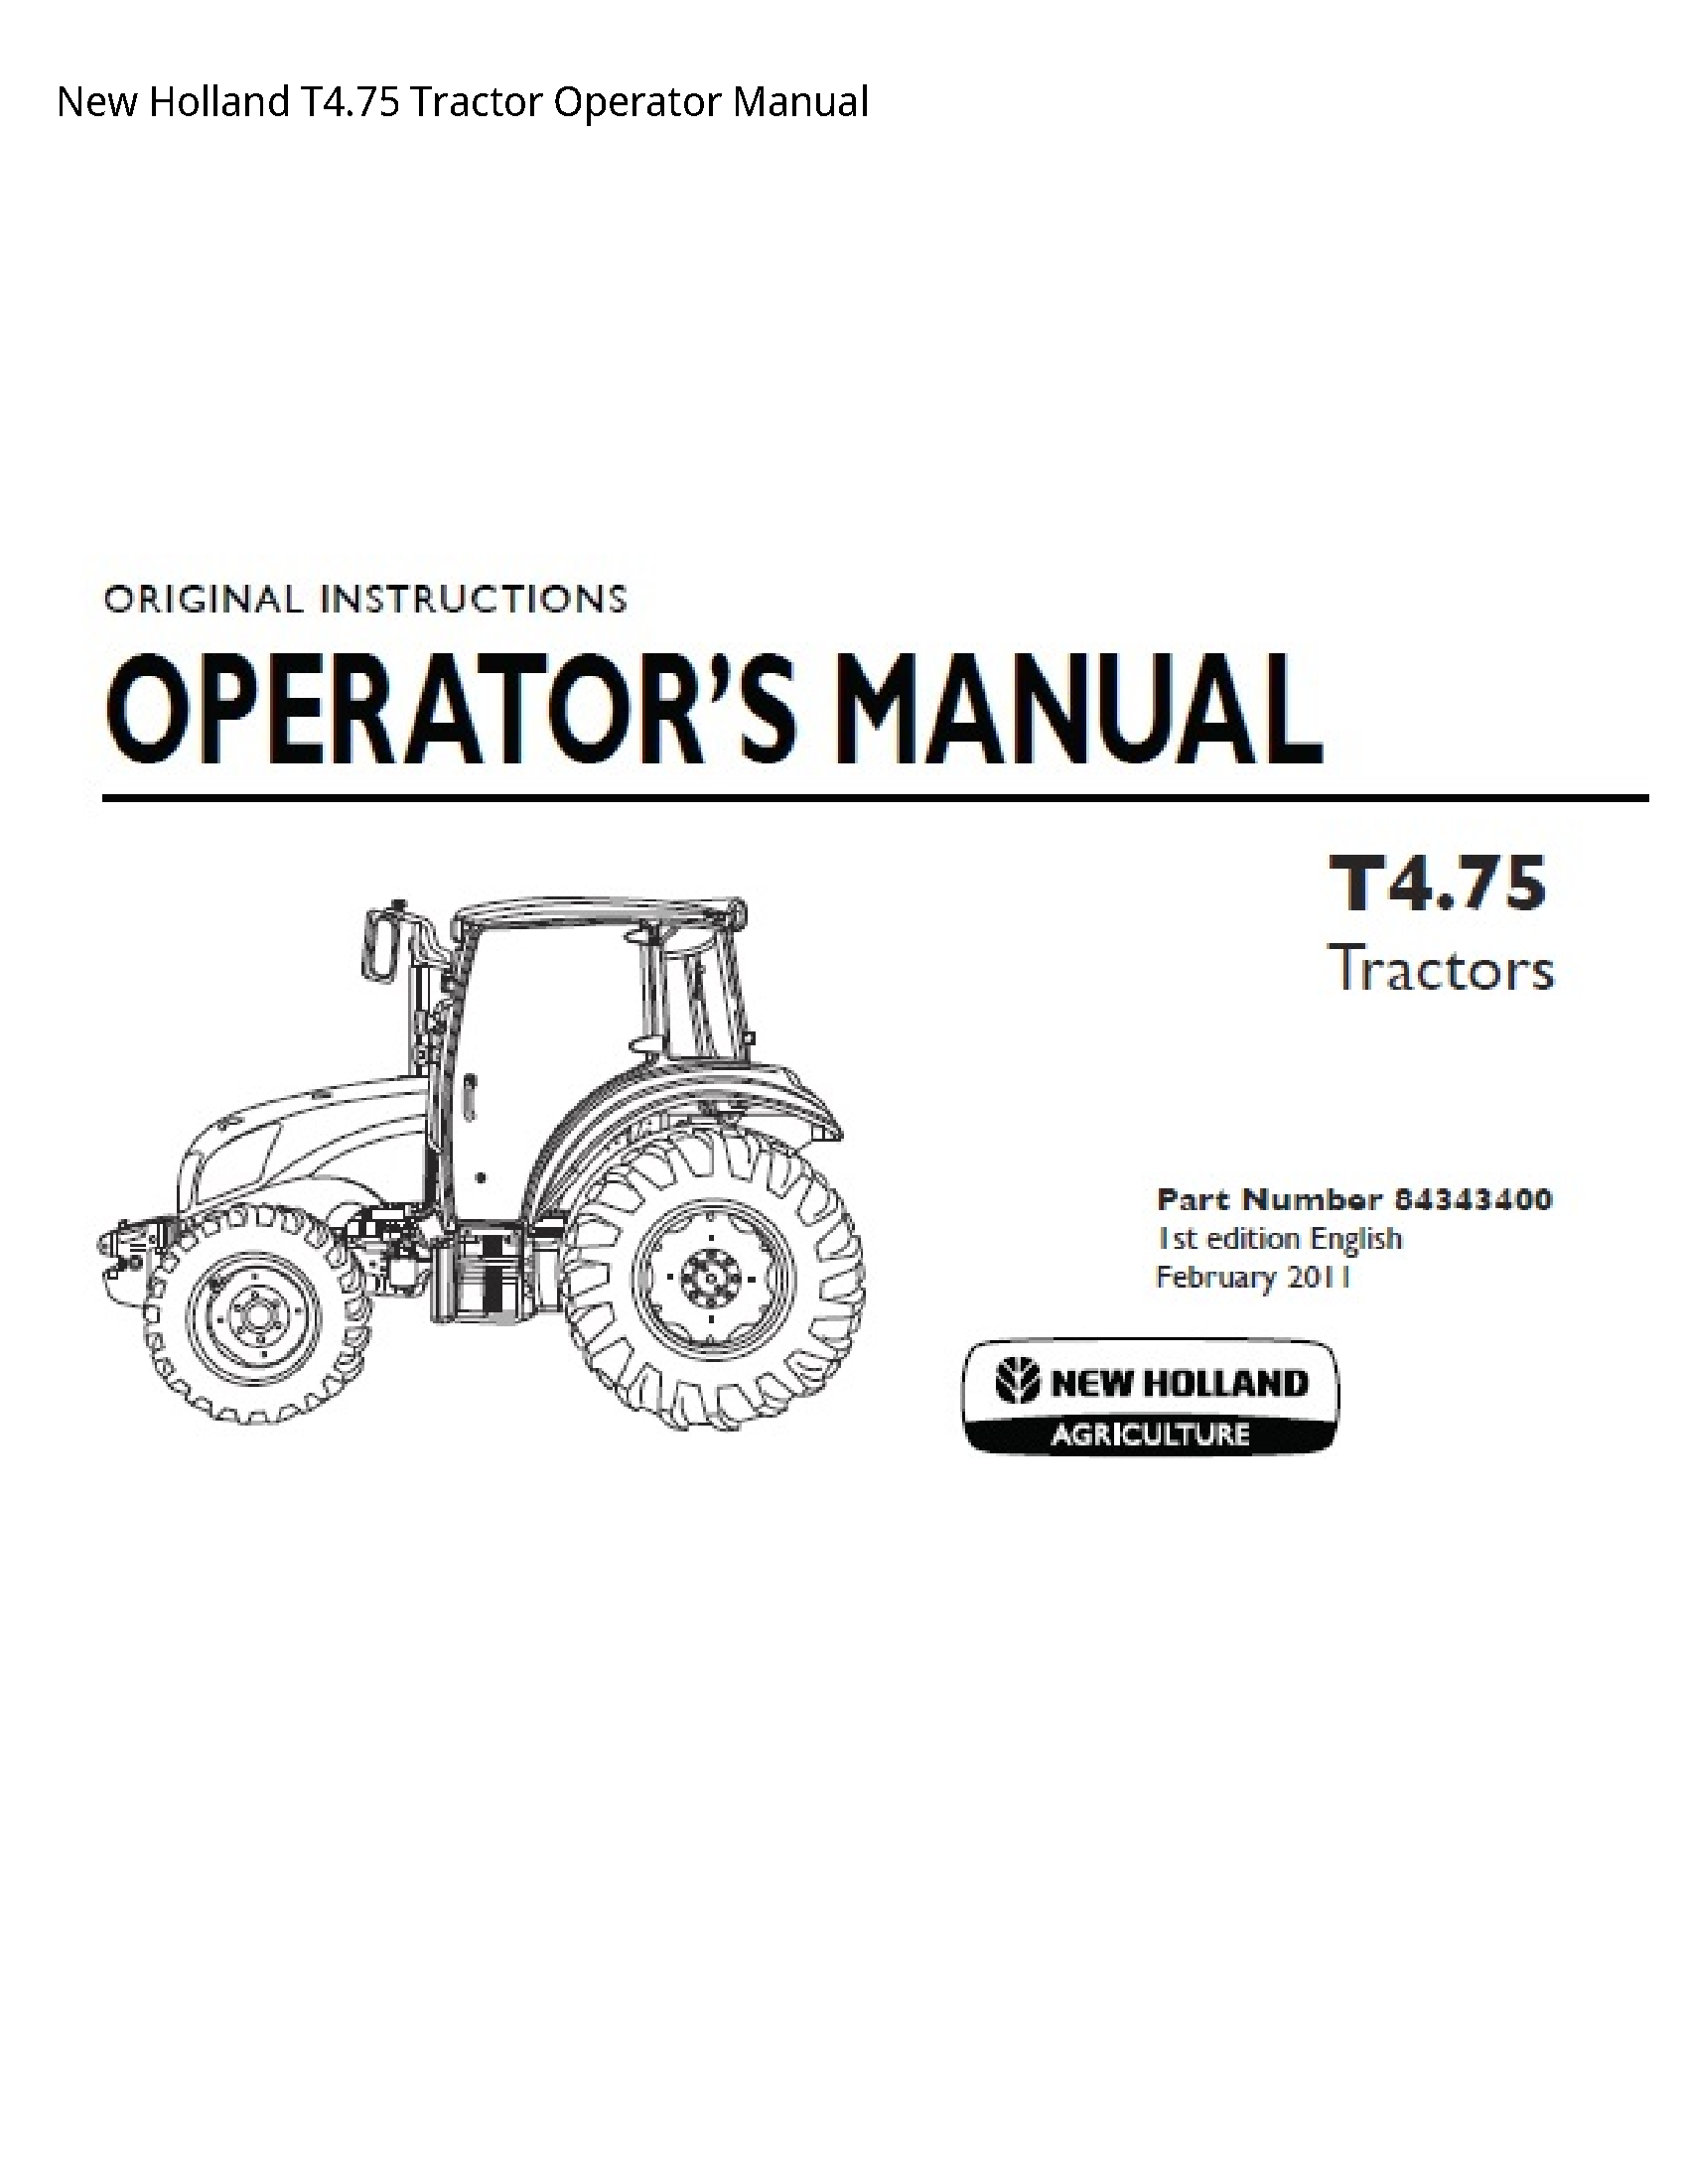 New Holland T4.75 Tractor Operator manual